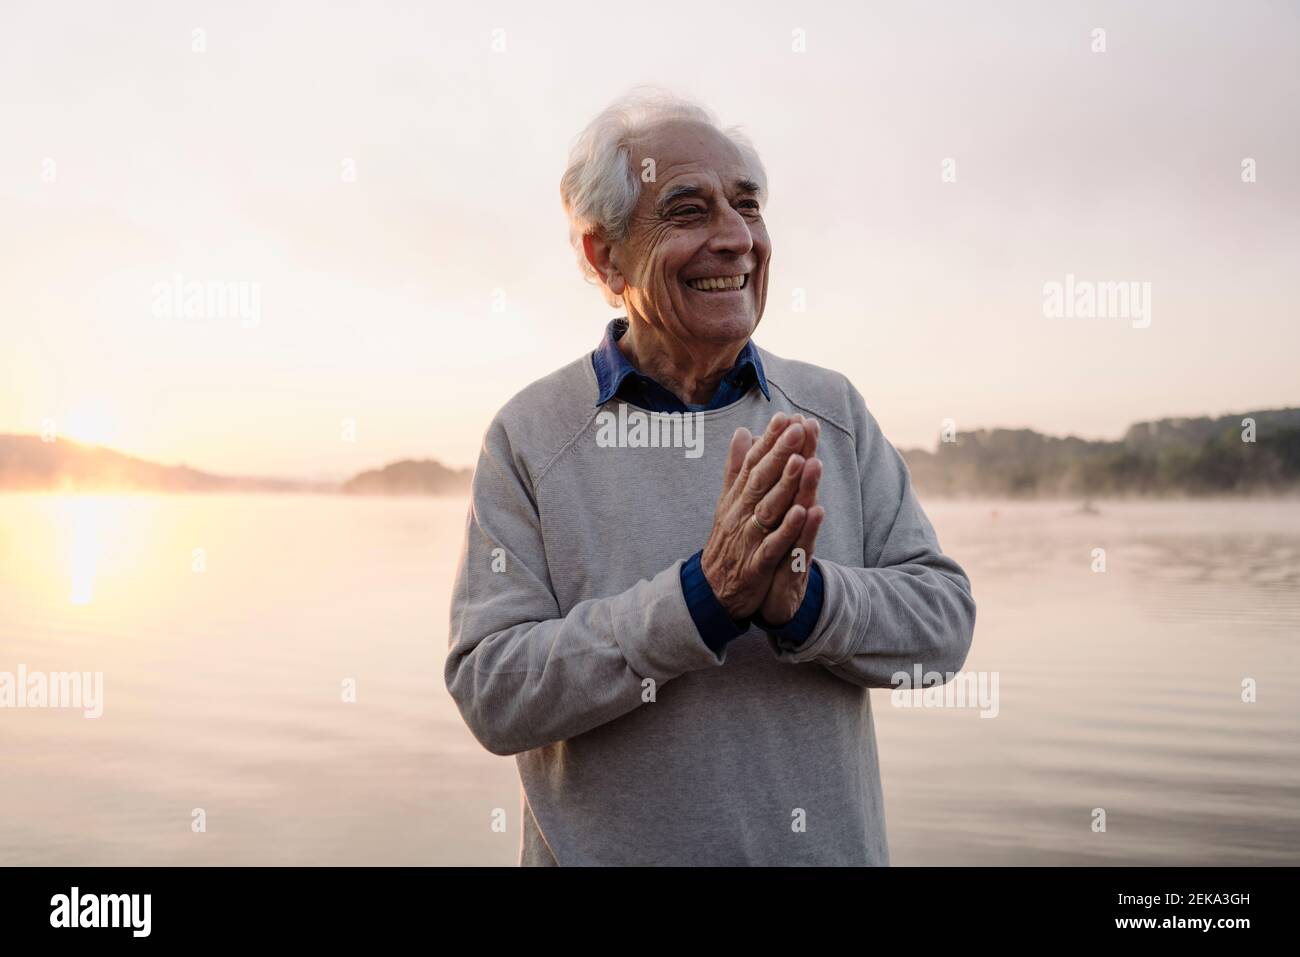 Smiling man standing with hands clasped against lake Stock Photo